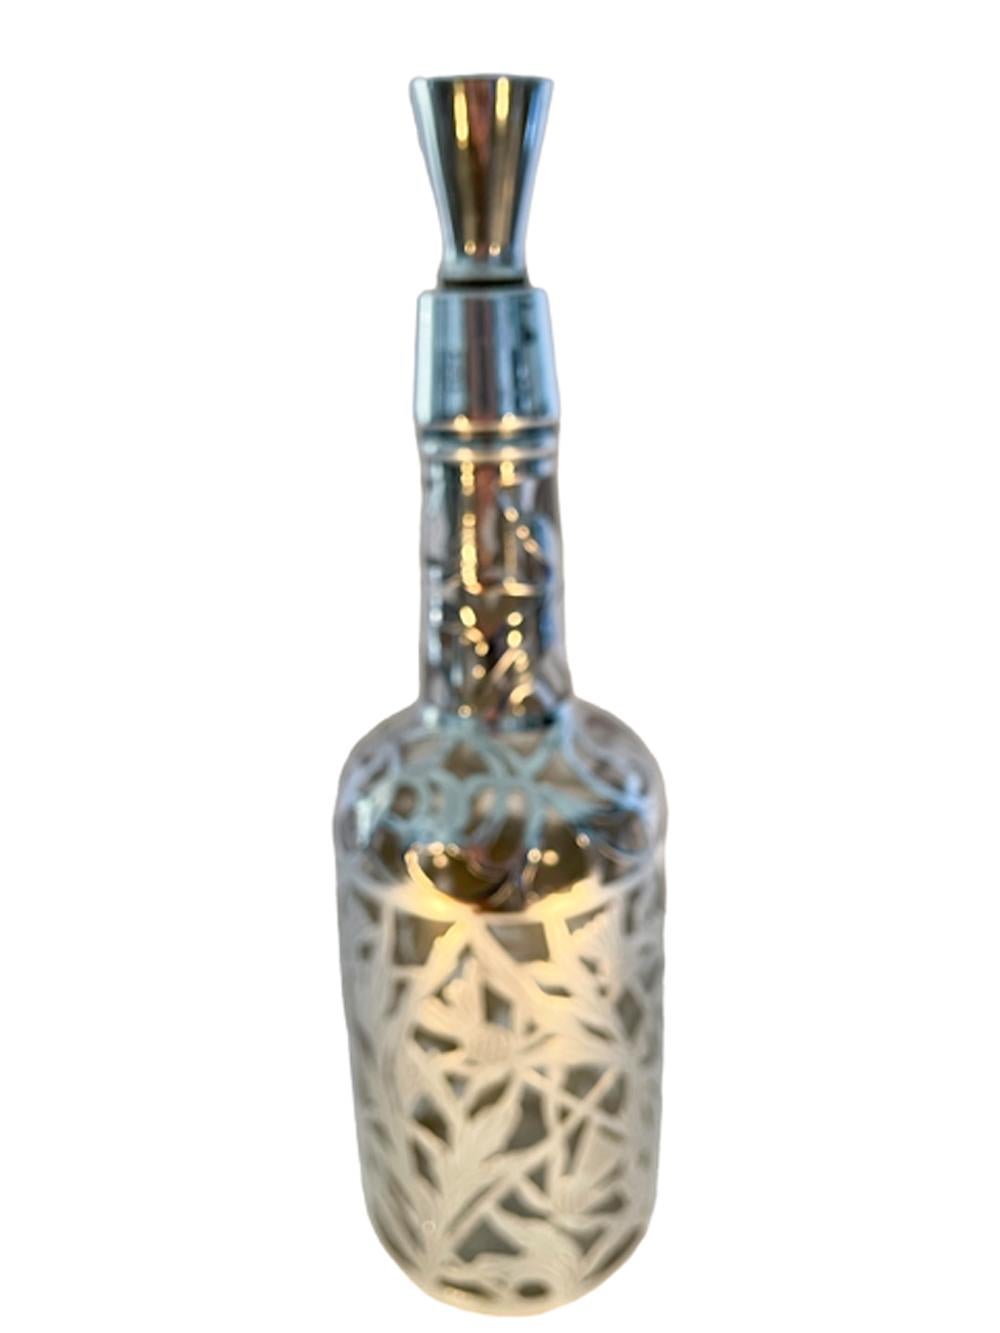 20th Century Art Nouveau Silver Overlay Decanter or Back Bar Bottle with Thistle Design  For Sale